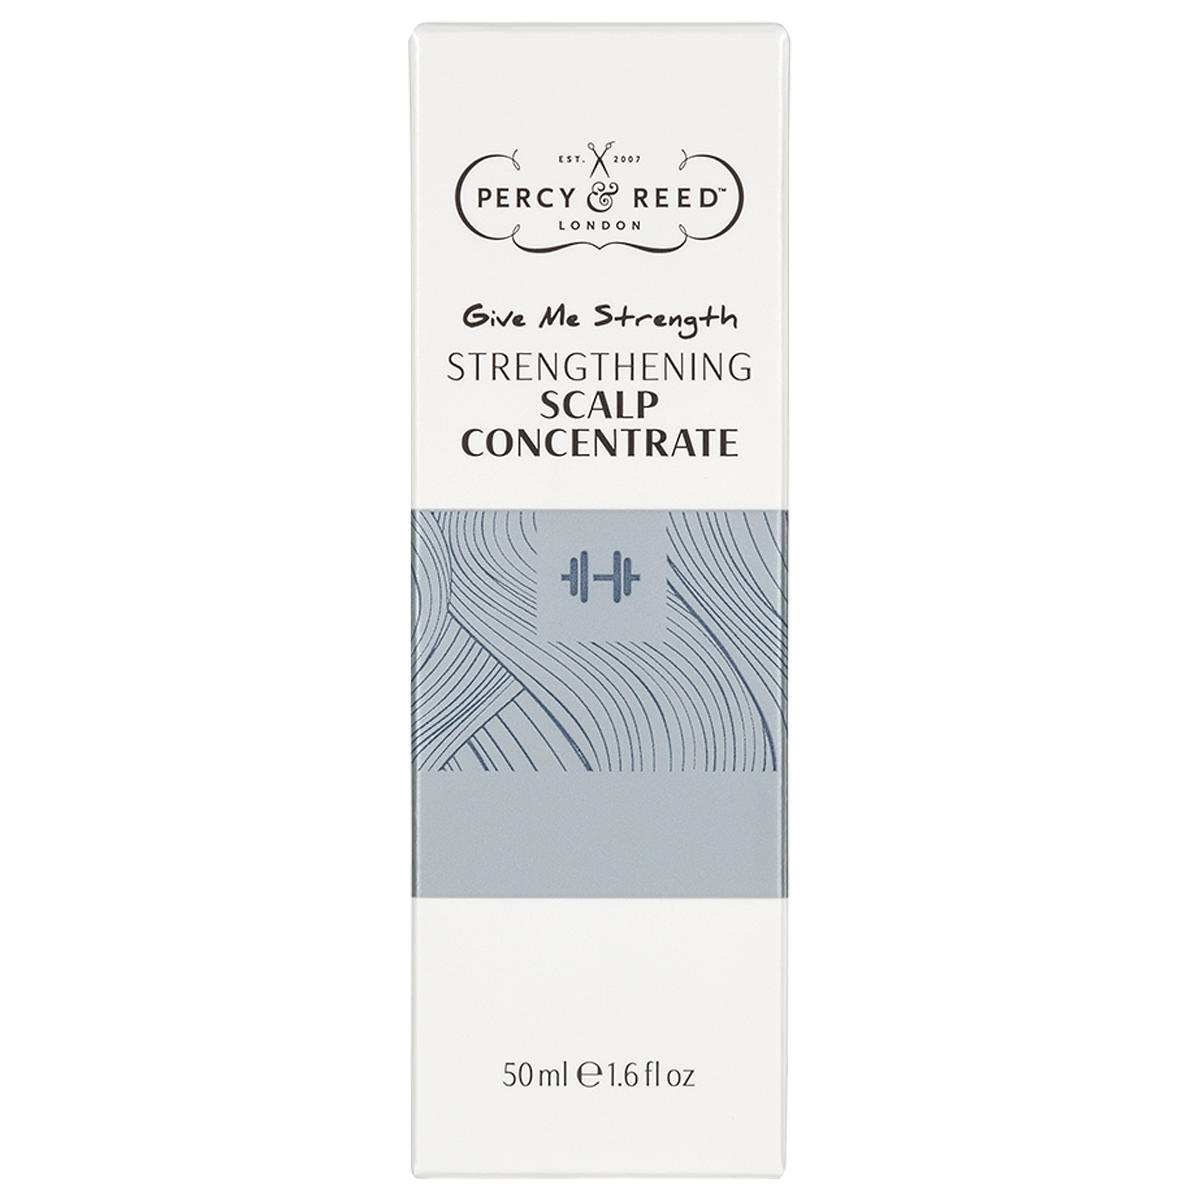 Percy & Reed Give Me Strength Strengtheming Scalp Concentrate 50 ml - 2